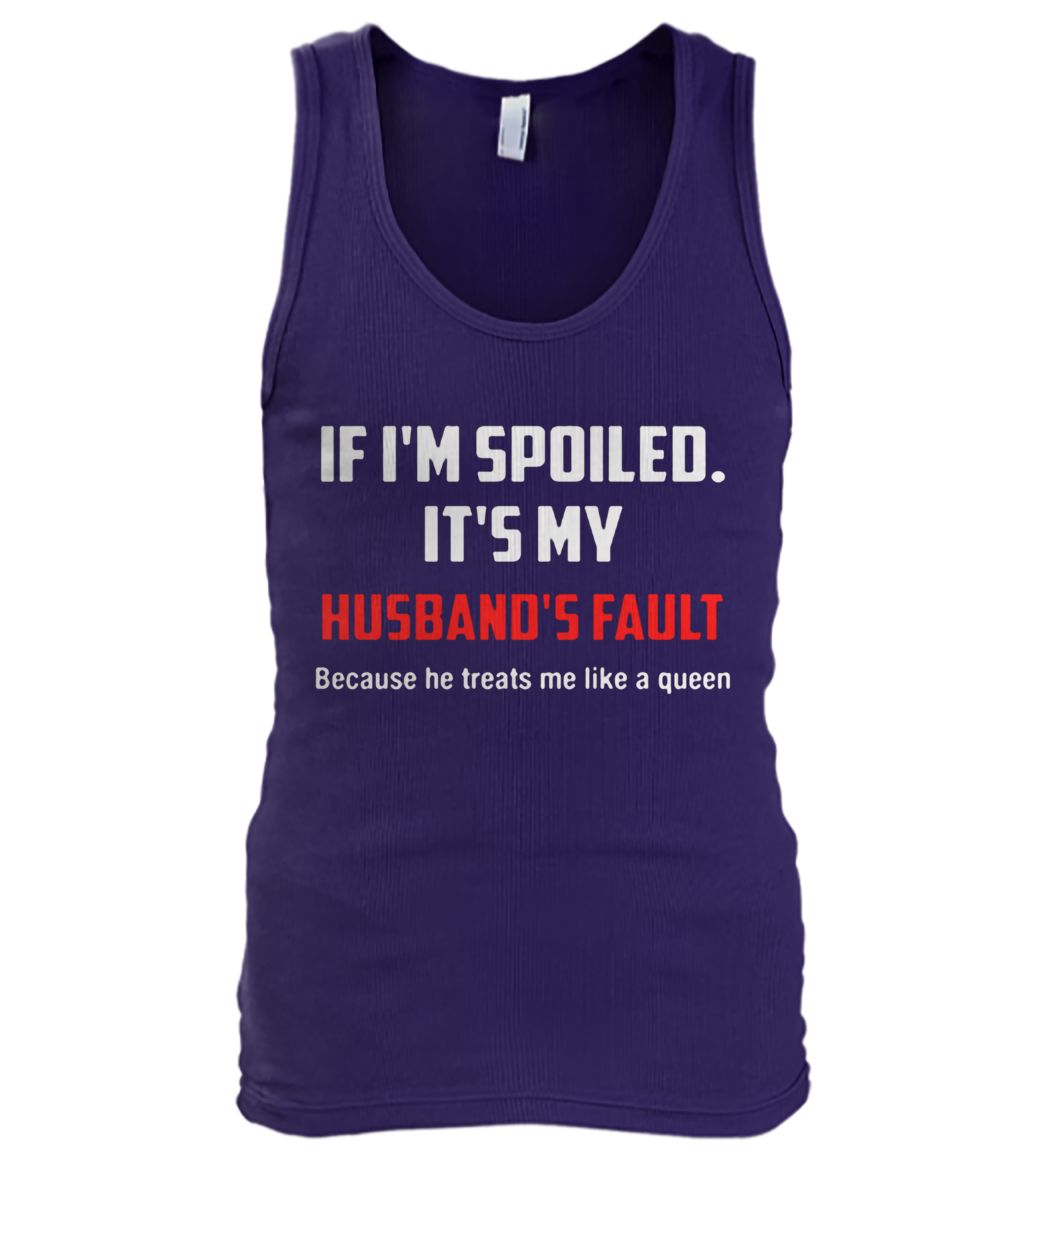 If I'm spoiled it's my husband's fault men's tank top